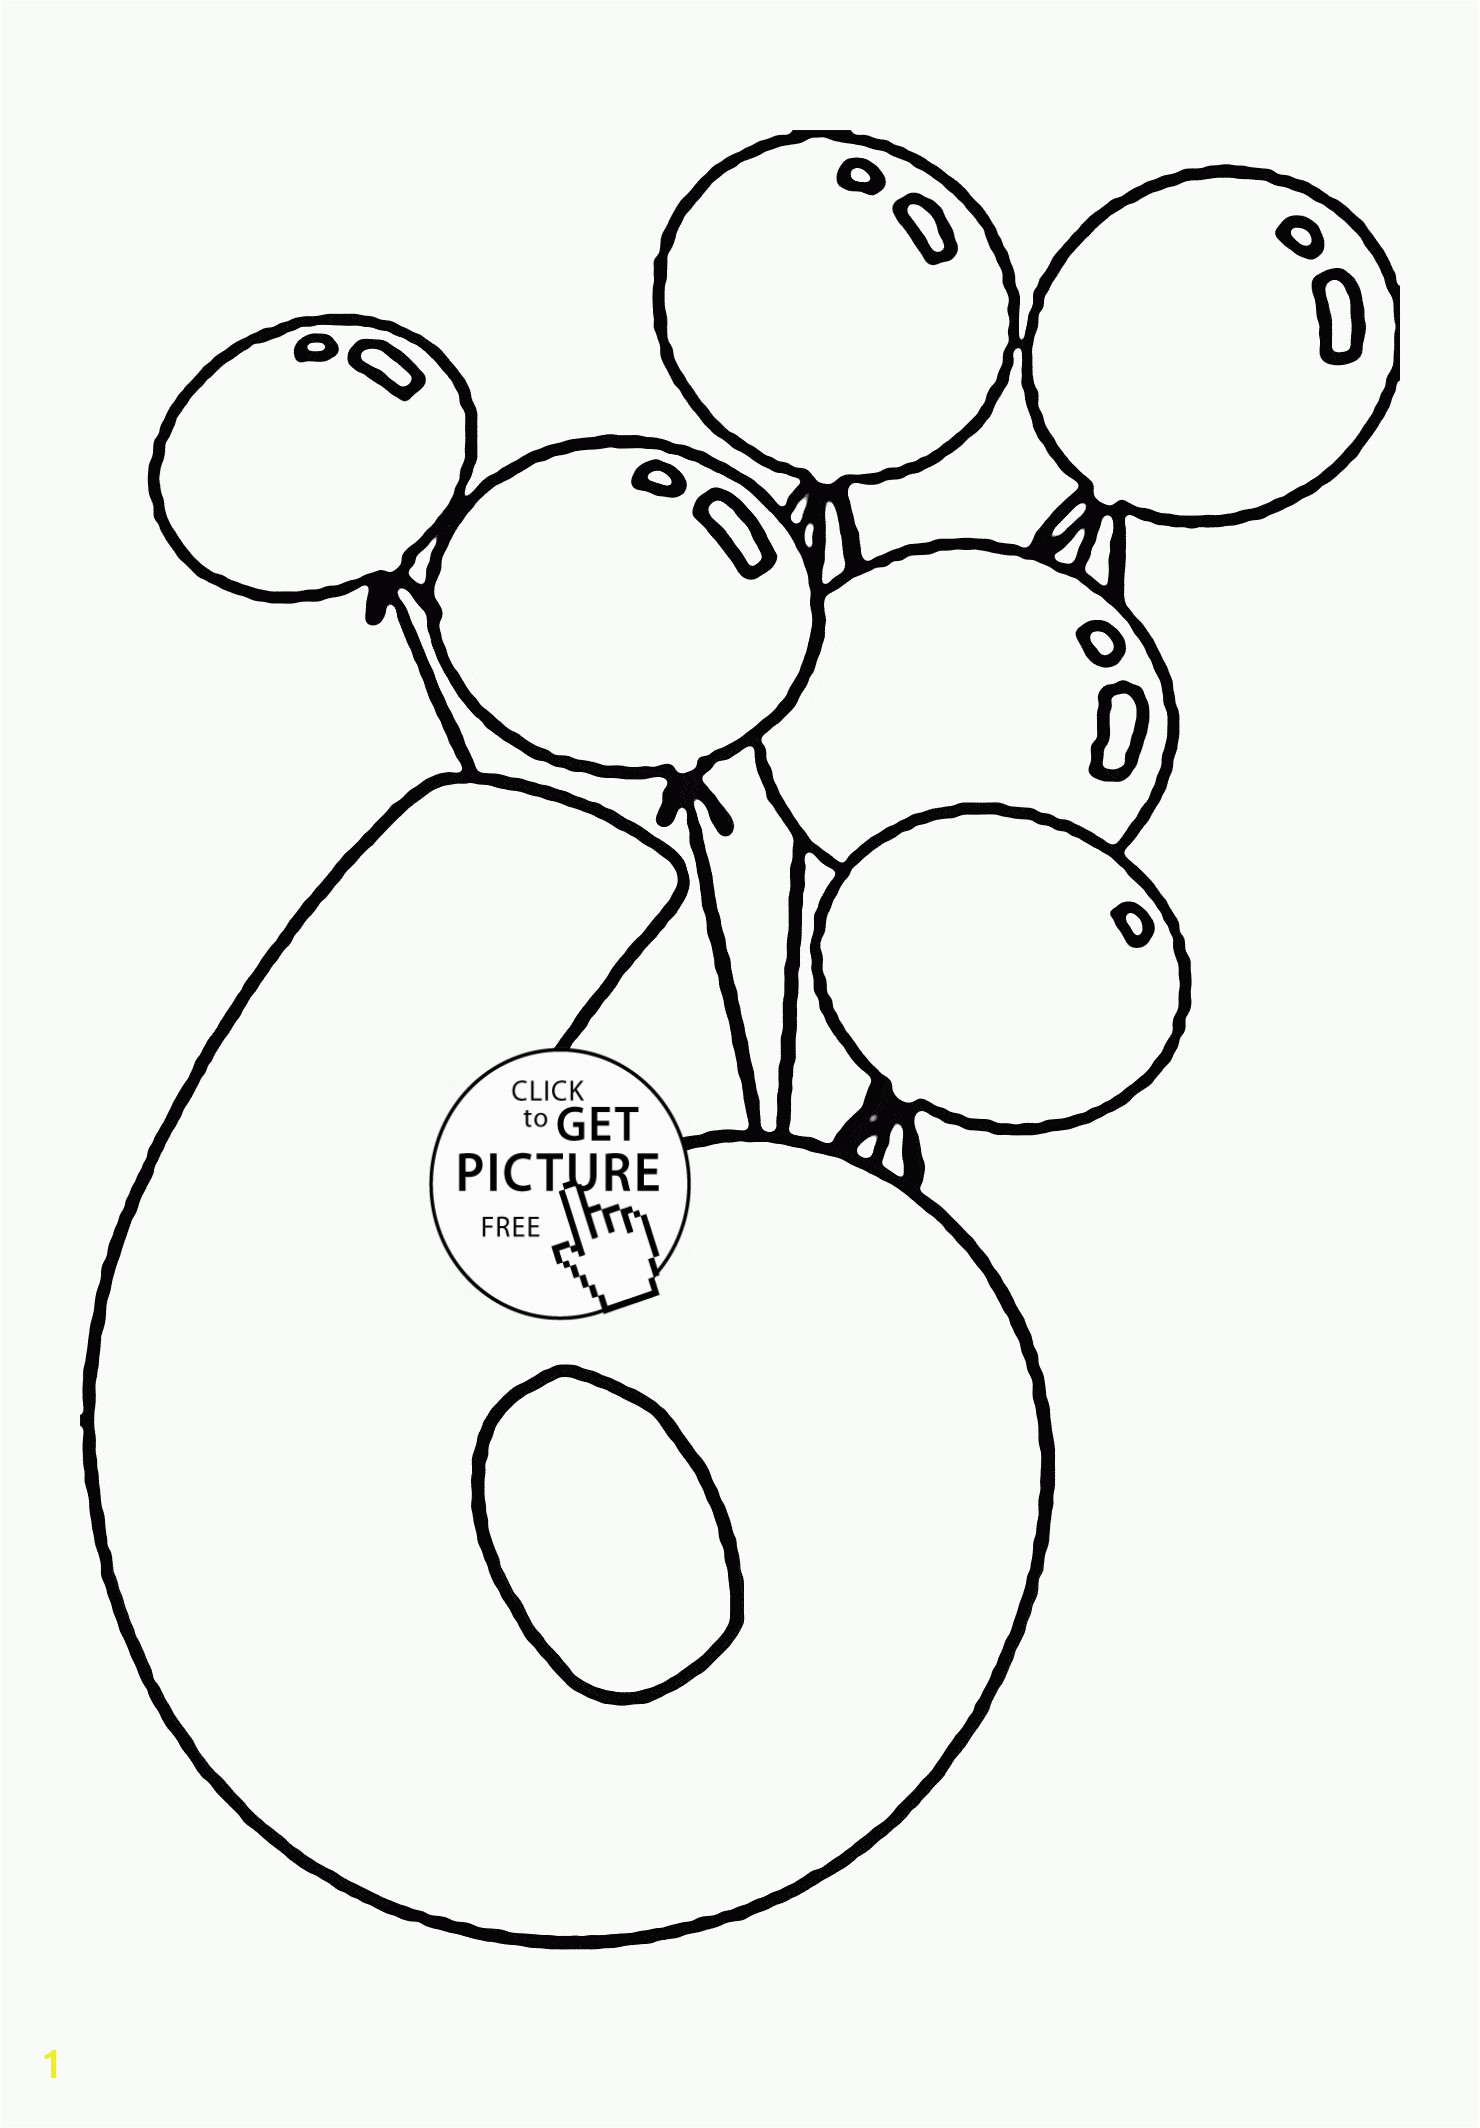 Happy 5th Birthday Coloring Pages Number 6 and Birthday Balloons Coloring Page for Kids Holiday